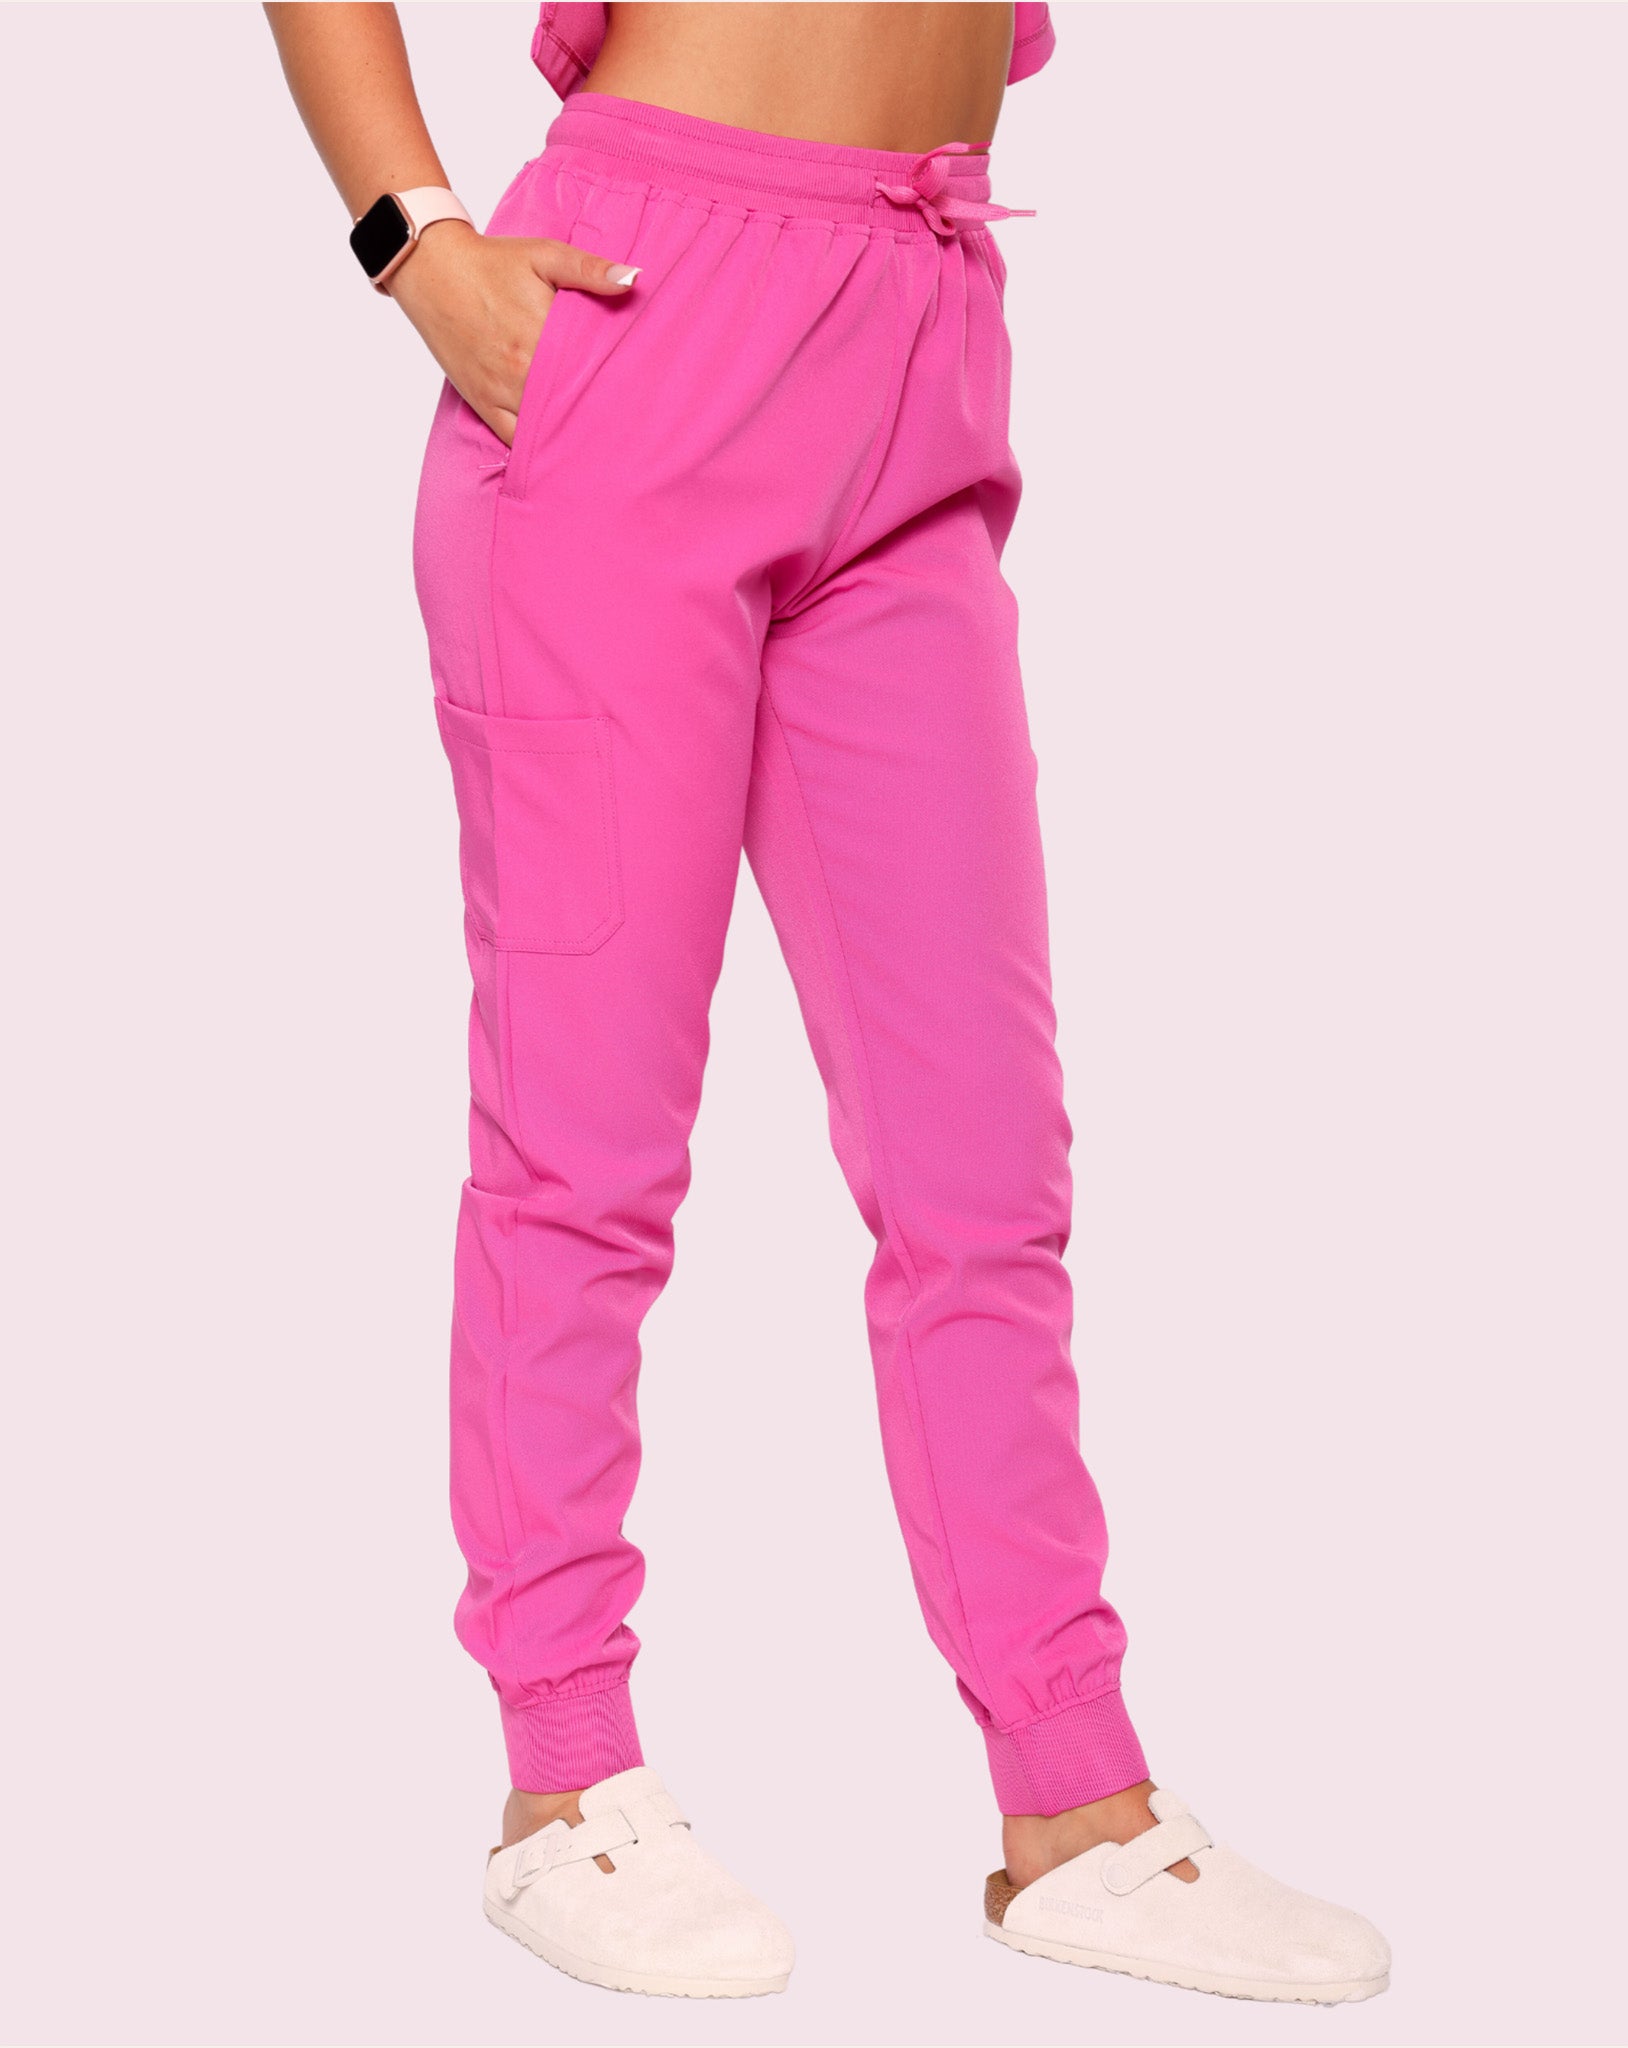 Purity Scrub Trousers - Hot Pink